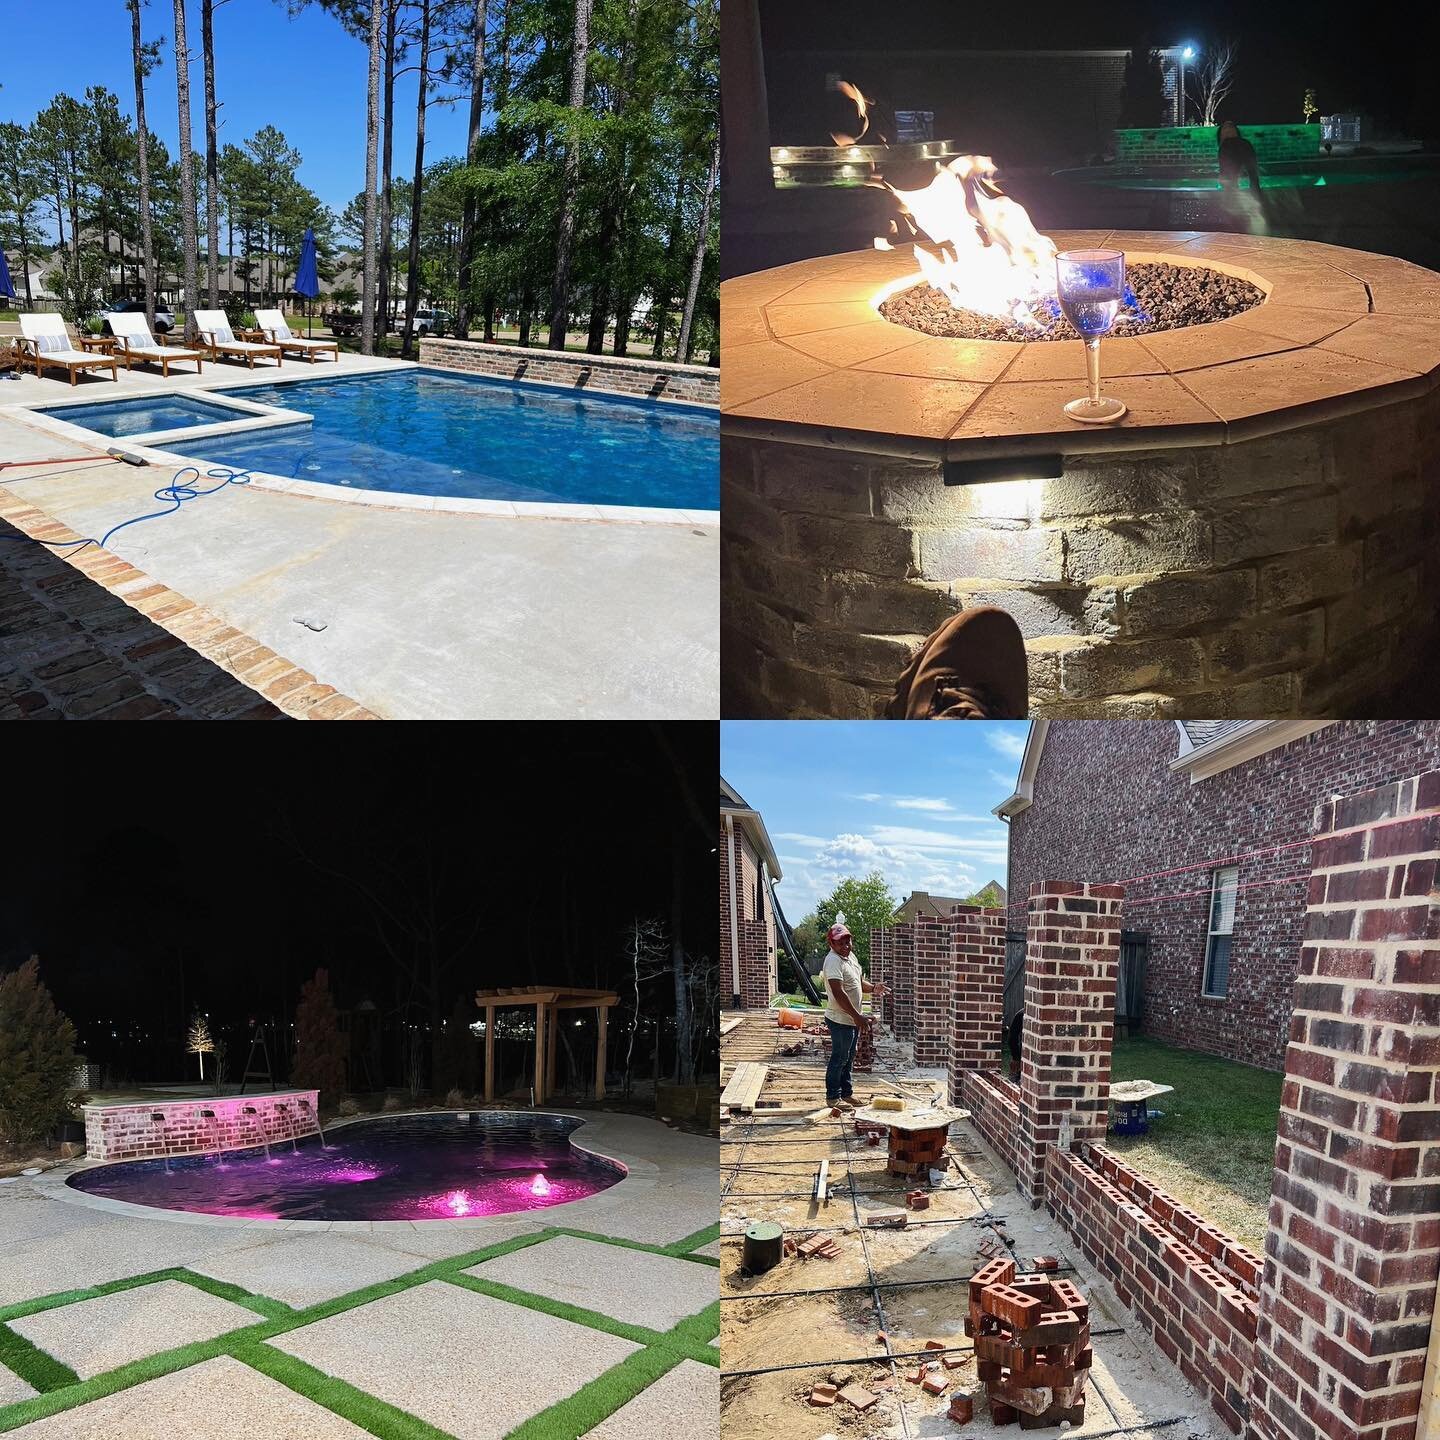 People often ask, can you build____? The answer is yes, we can! Here are some recent d+p projects! #dpluspdesignbuild